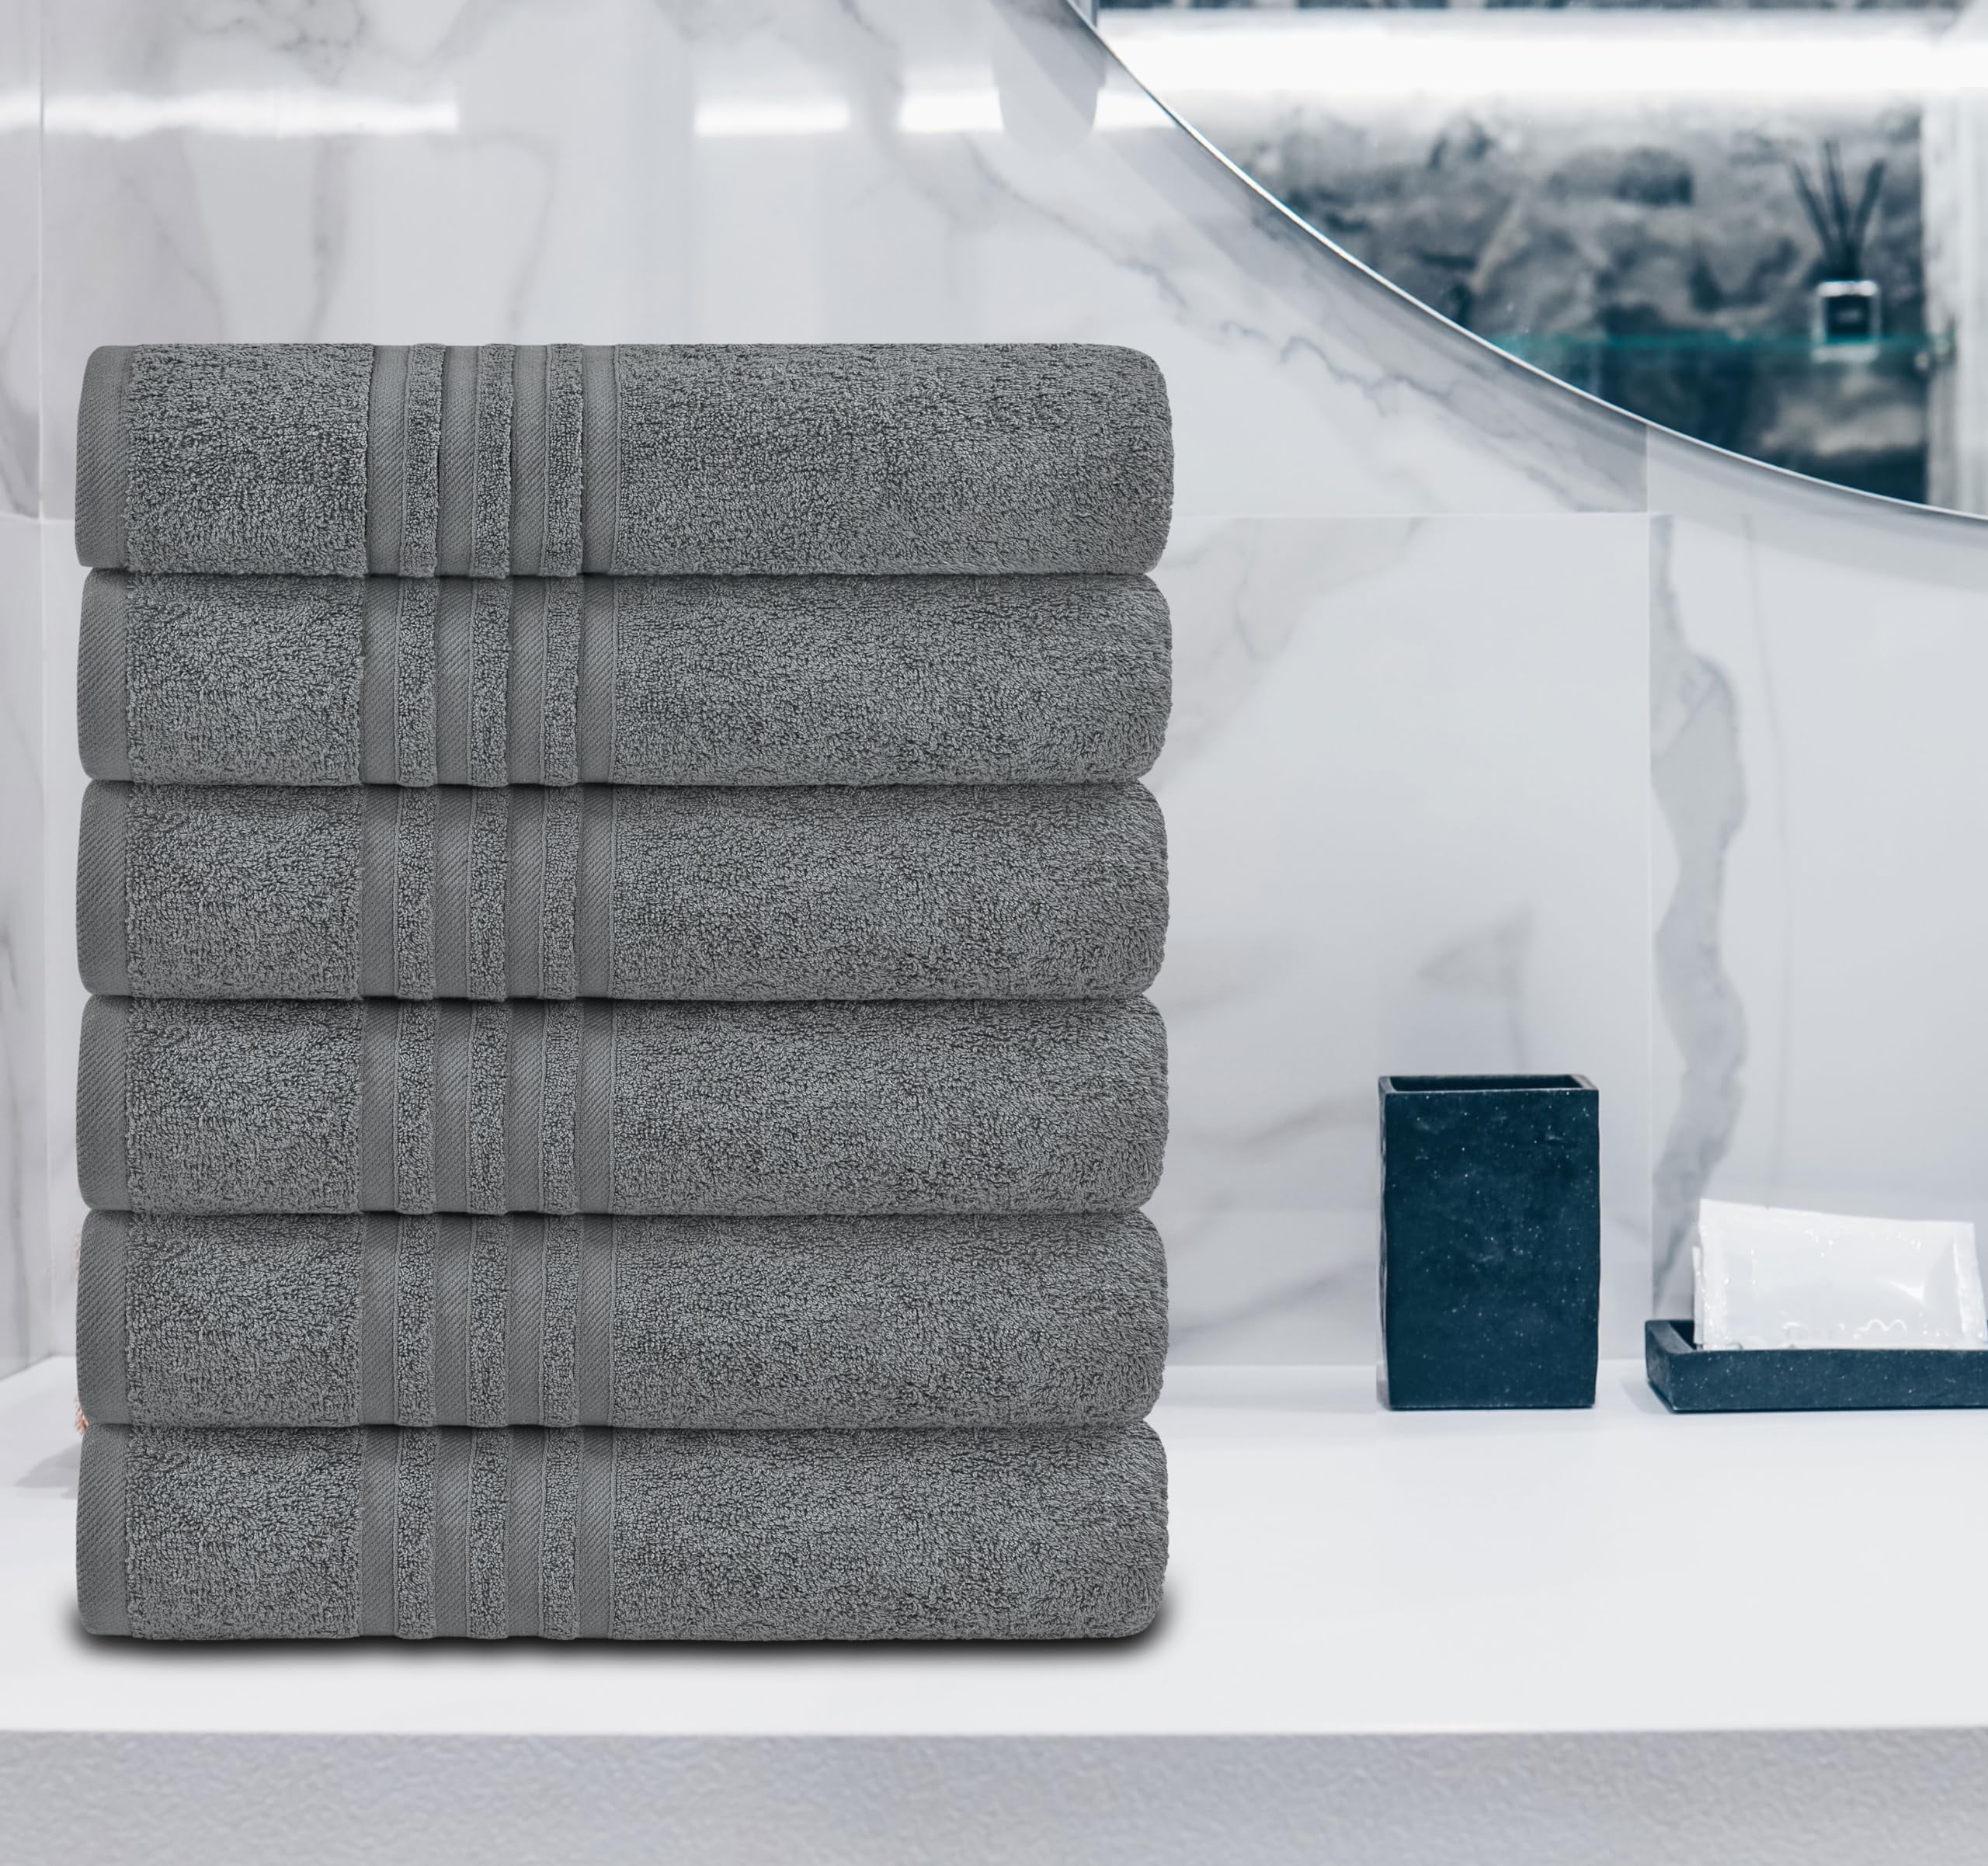 Tens Towels 4 Pc Dark Grey Bath Towels Set 100% Cotton Bathroom Towels 27 x  54 Inches Perfect Everyday Light Weight Quick Dry Towels for Bathroom